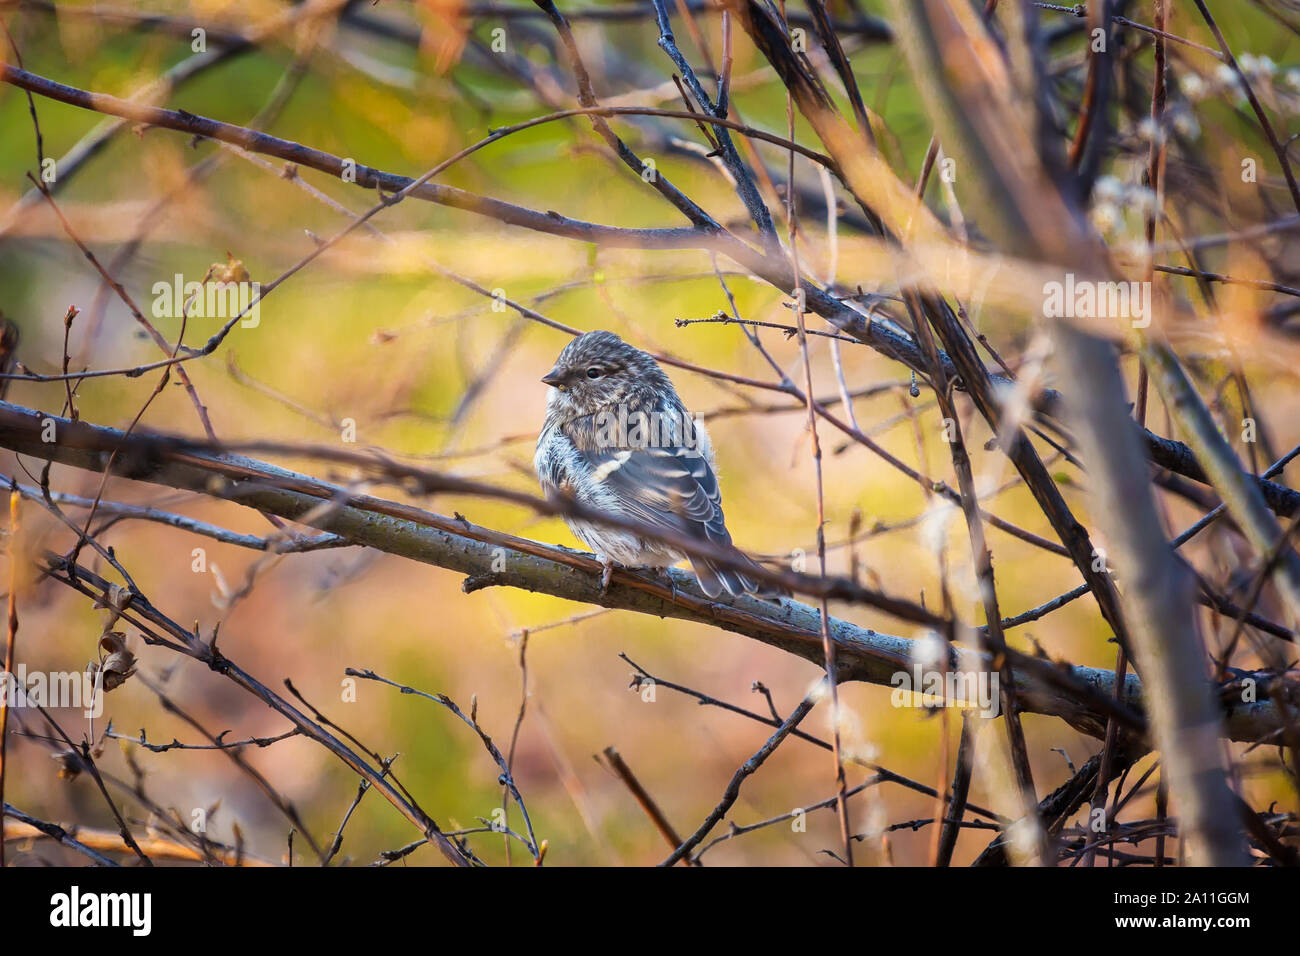 A small bird of the passerine order sits on a branch in the autumn forest Stock Photo